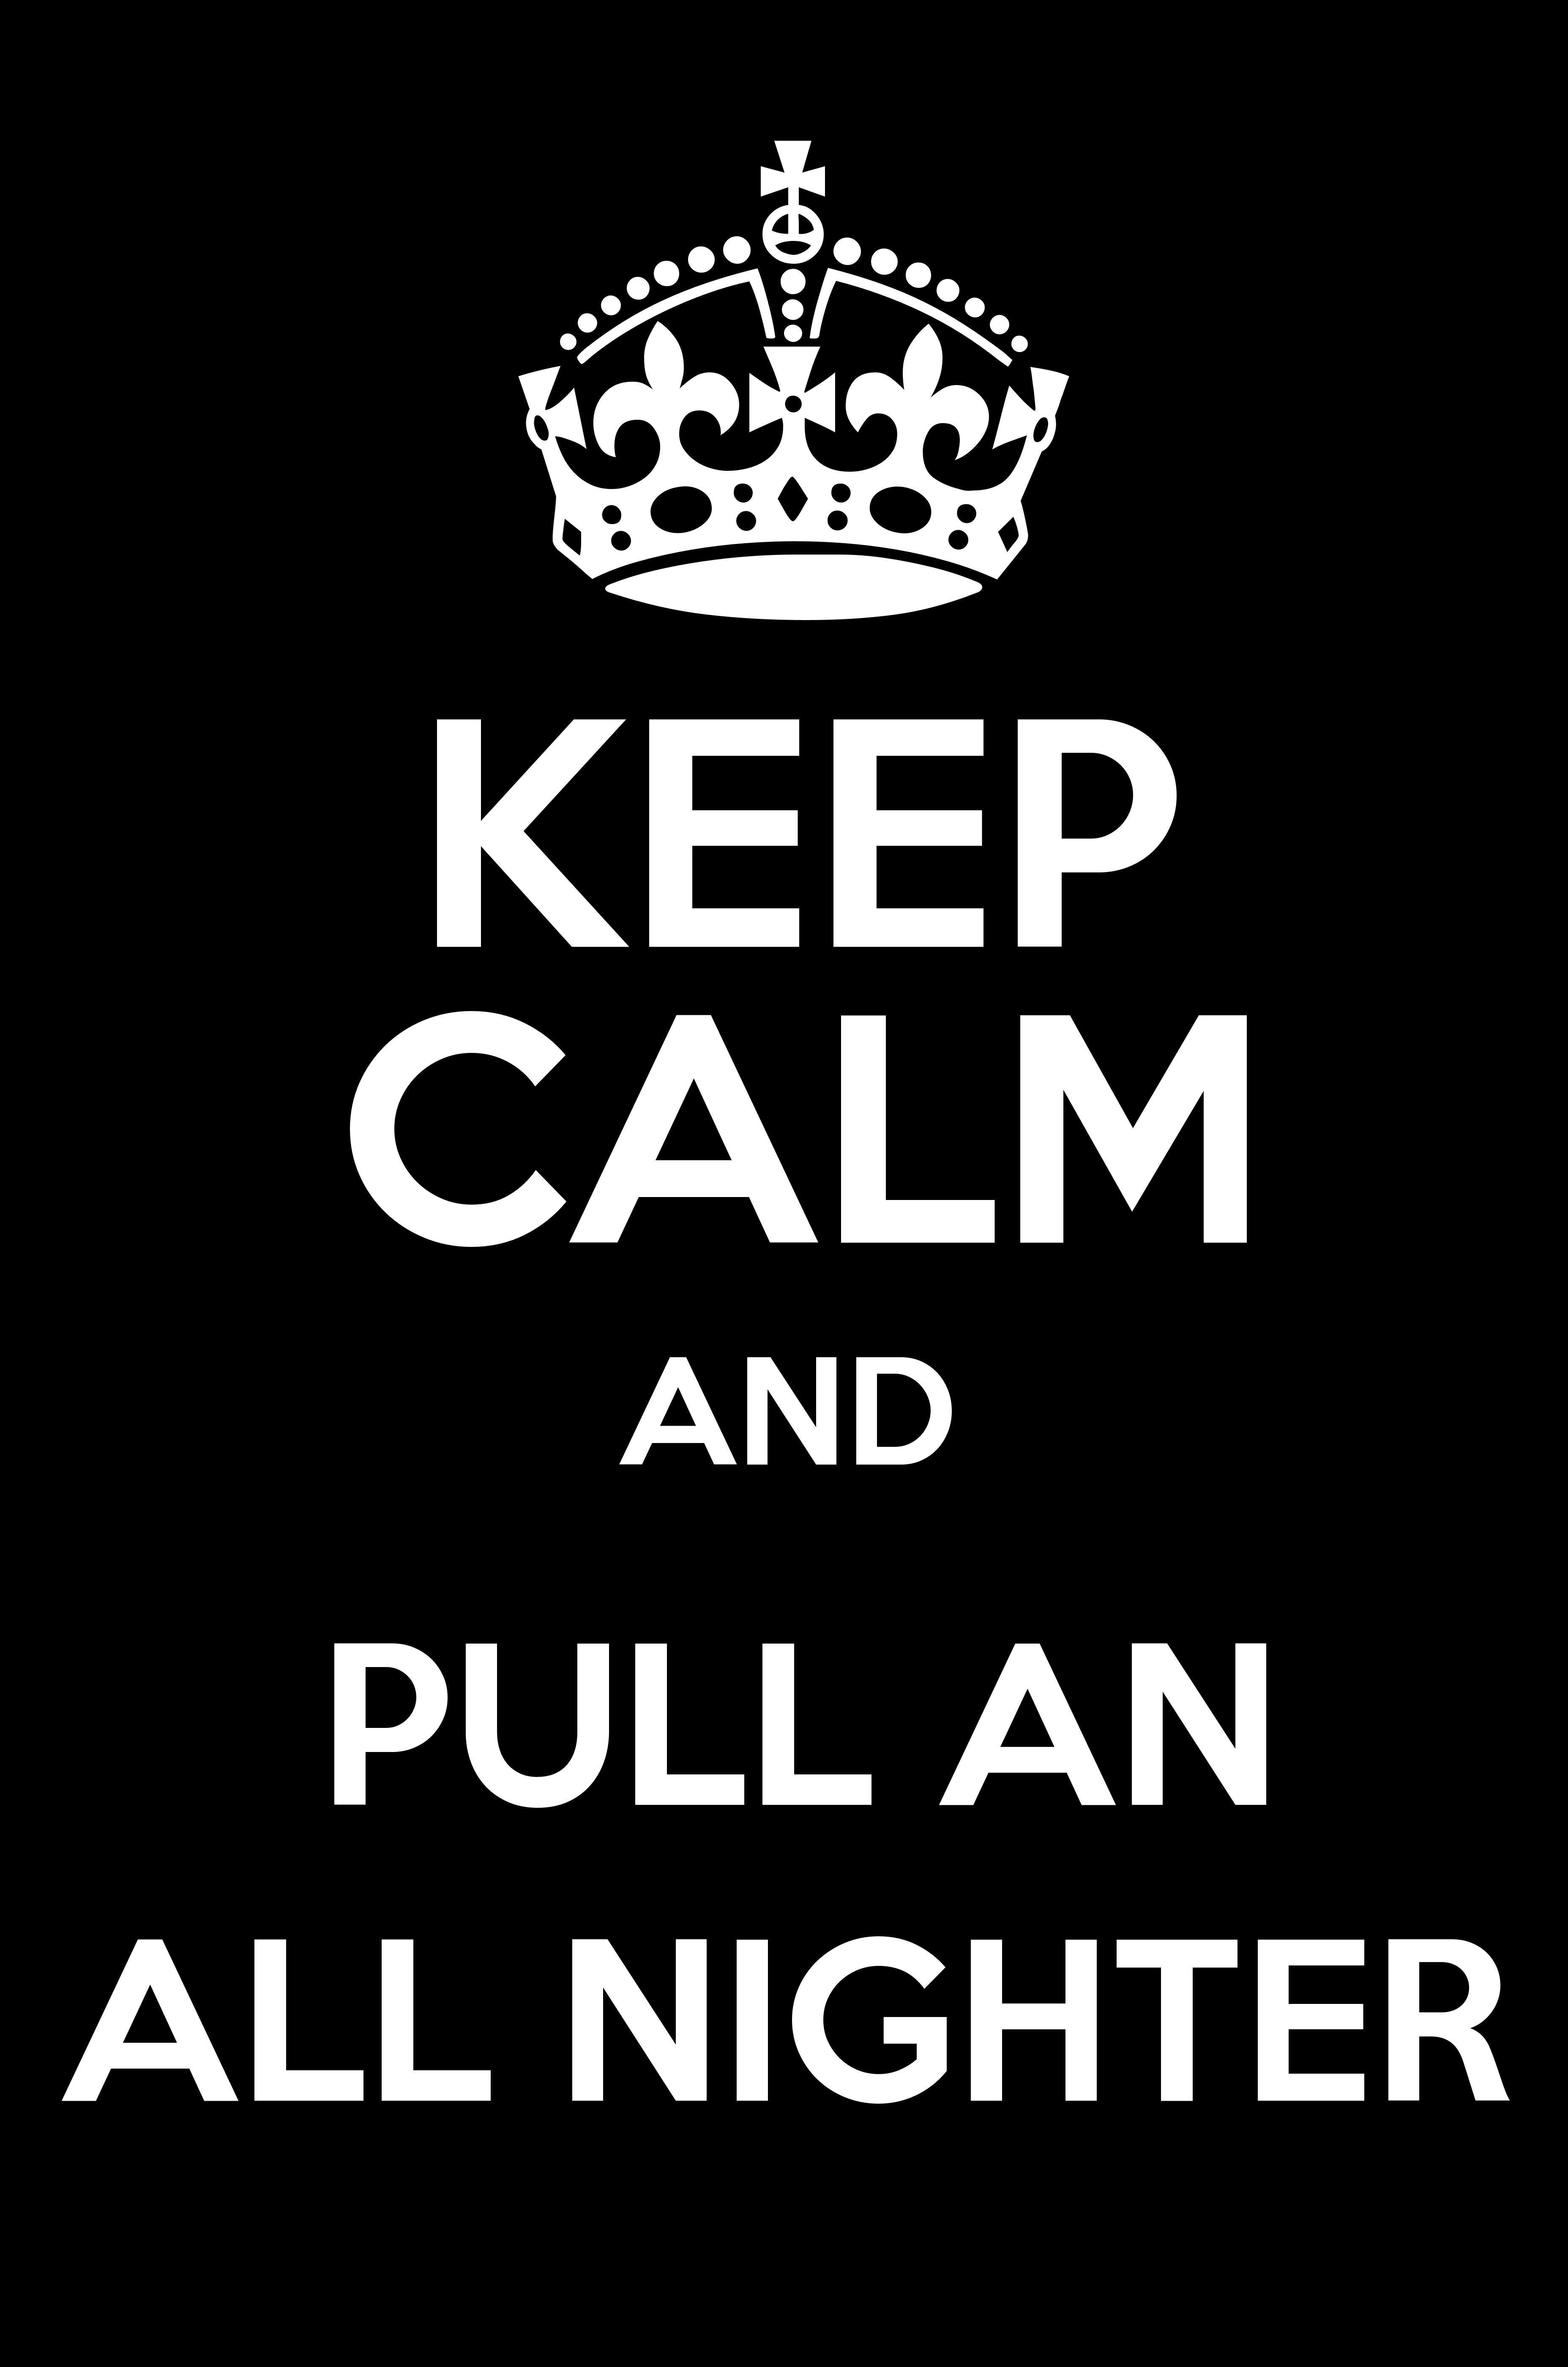 KEEP CALM AND PULL AN ALL NIGHTER Calm and Posters Generator